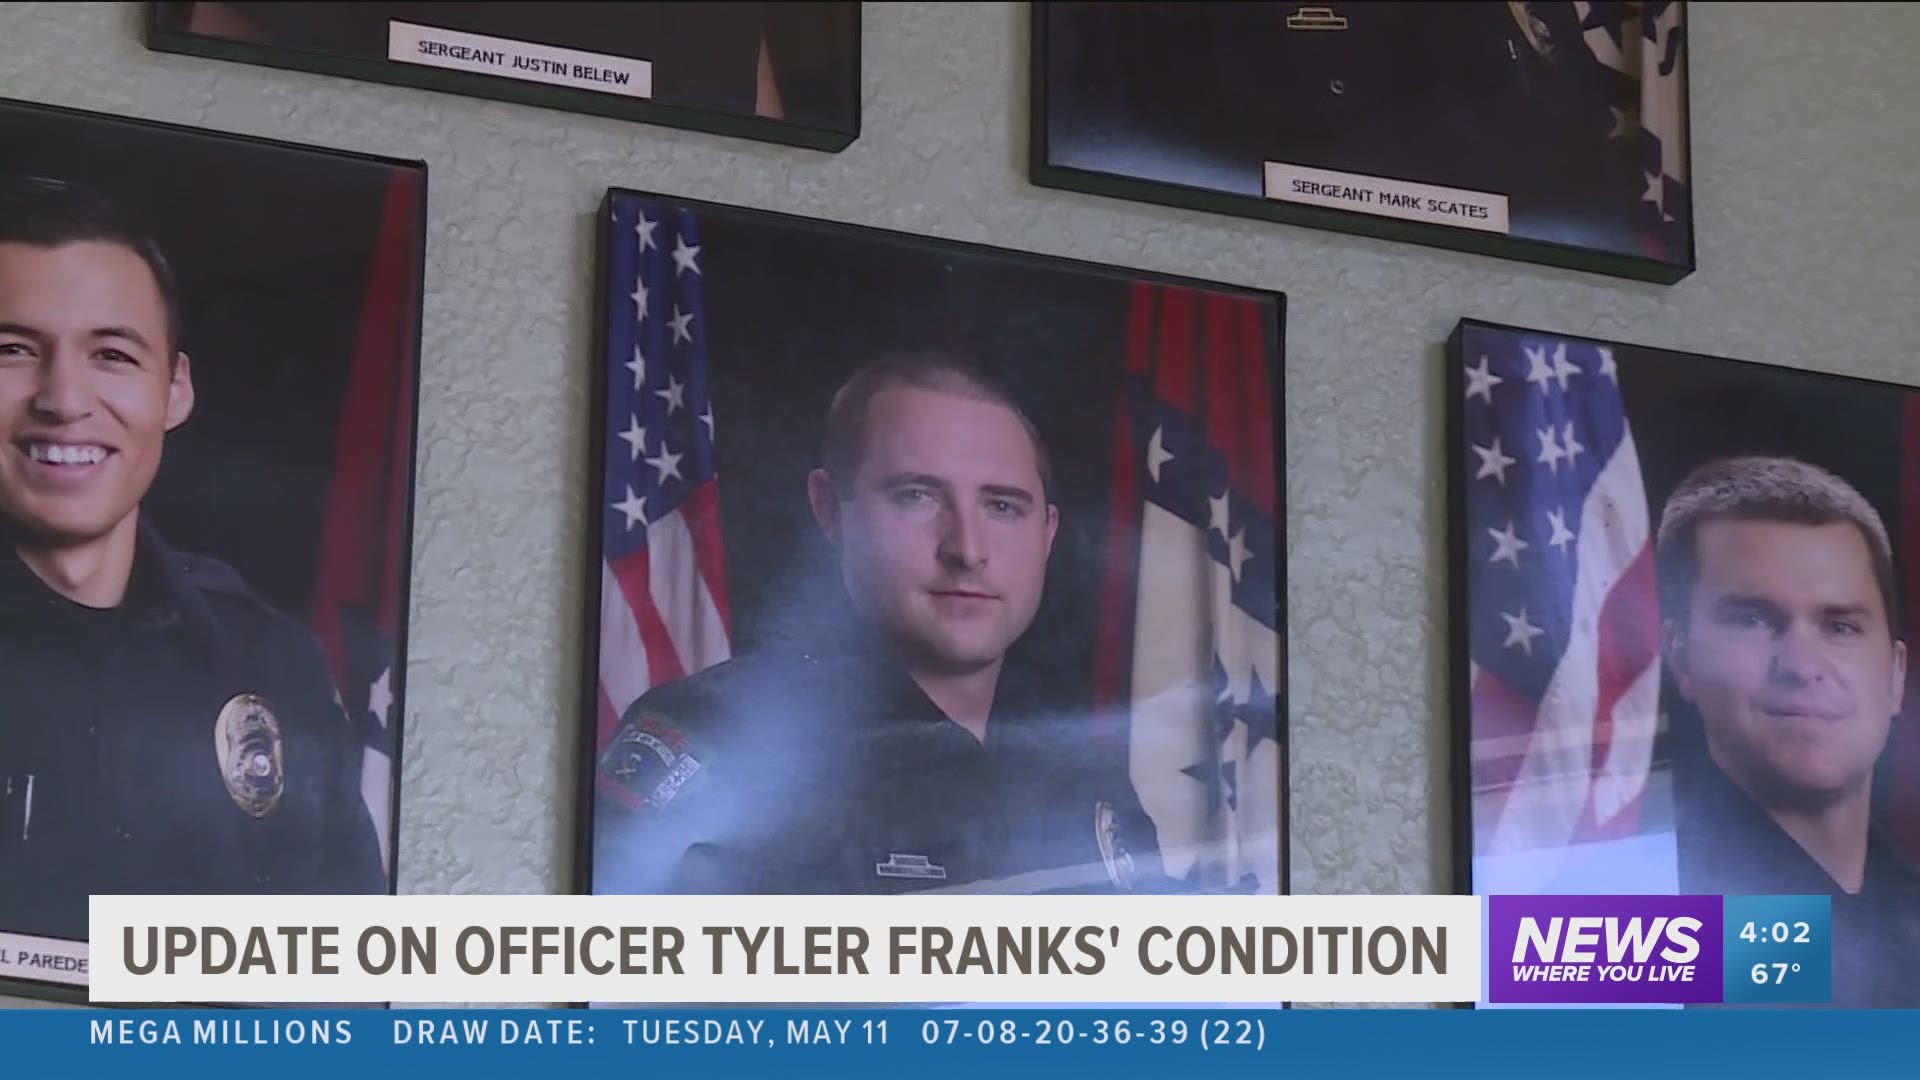 Officer Franks' legs were fractured, and his left leg sustained unrepairable damage to the vascular system.